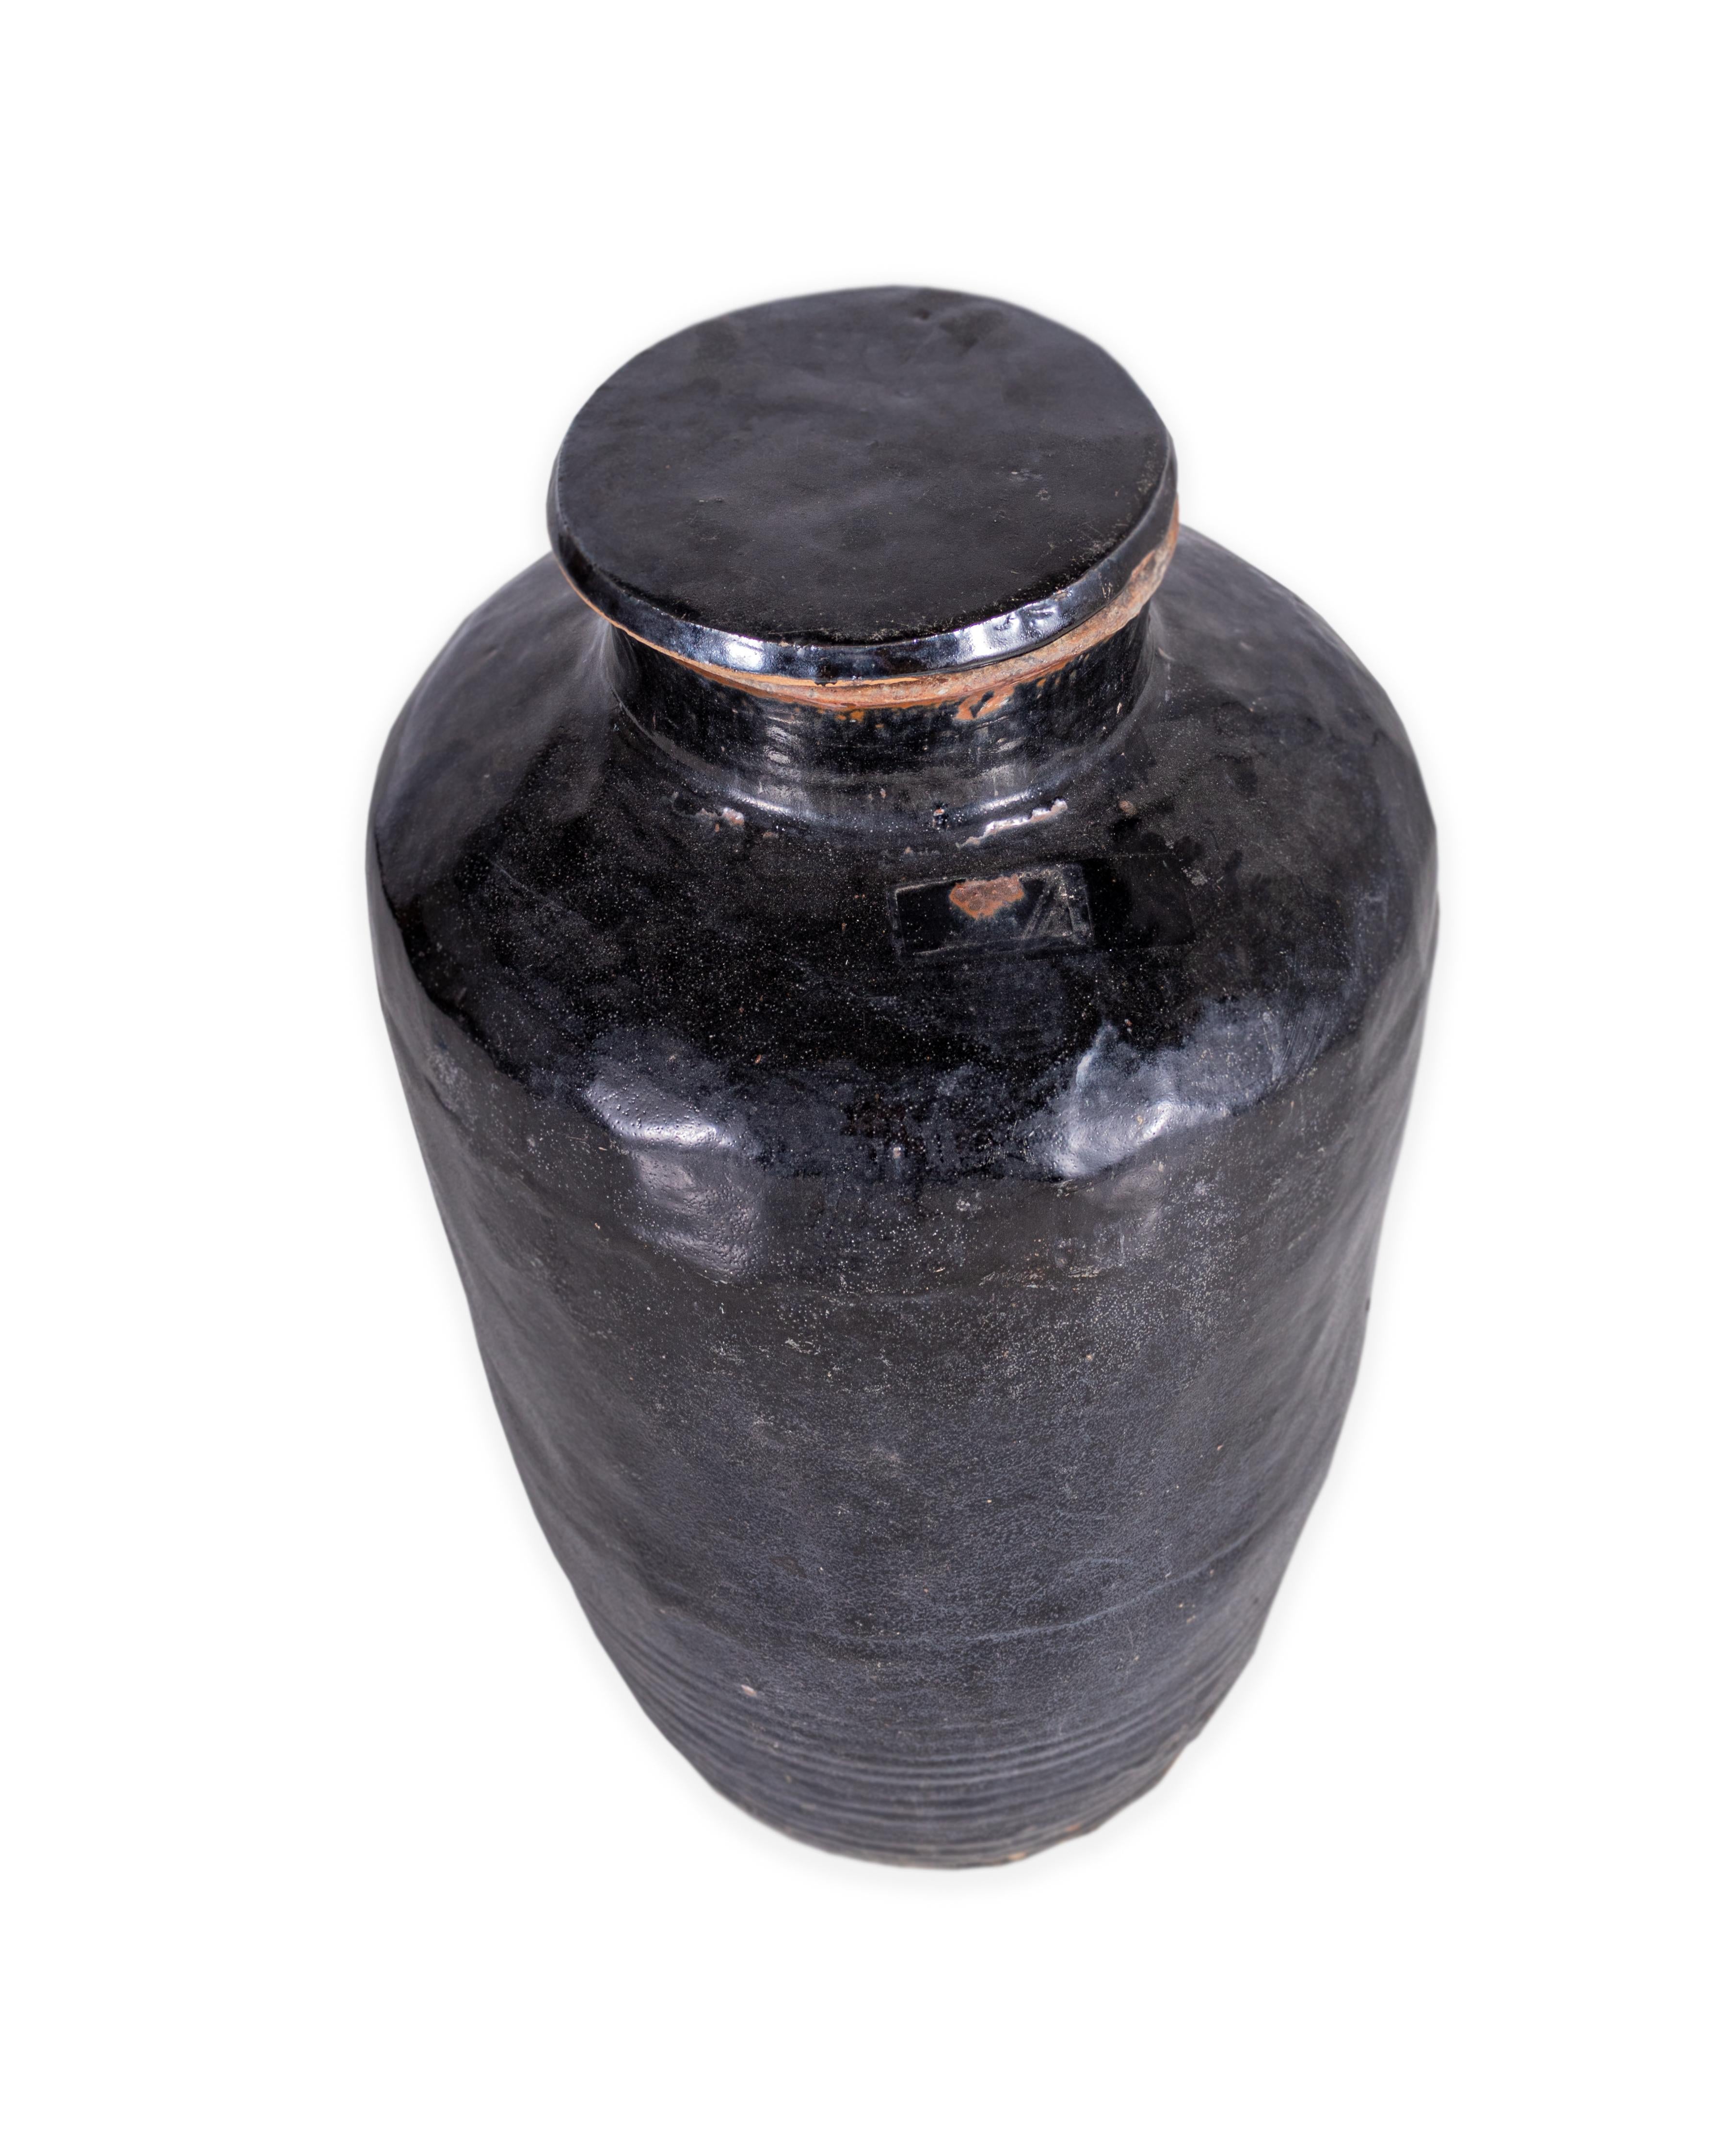 Ceramic glazed storage jar with lid.

This piece is a part of Brendan Bass’s one-of-a-kind collection, Le Monde. French for “The World”, the Le Monde collection is made up of rare and hard to find pieces curated by Brendan from estate sales,